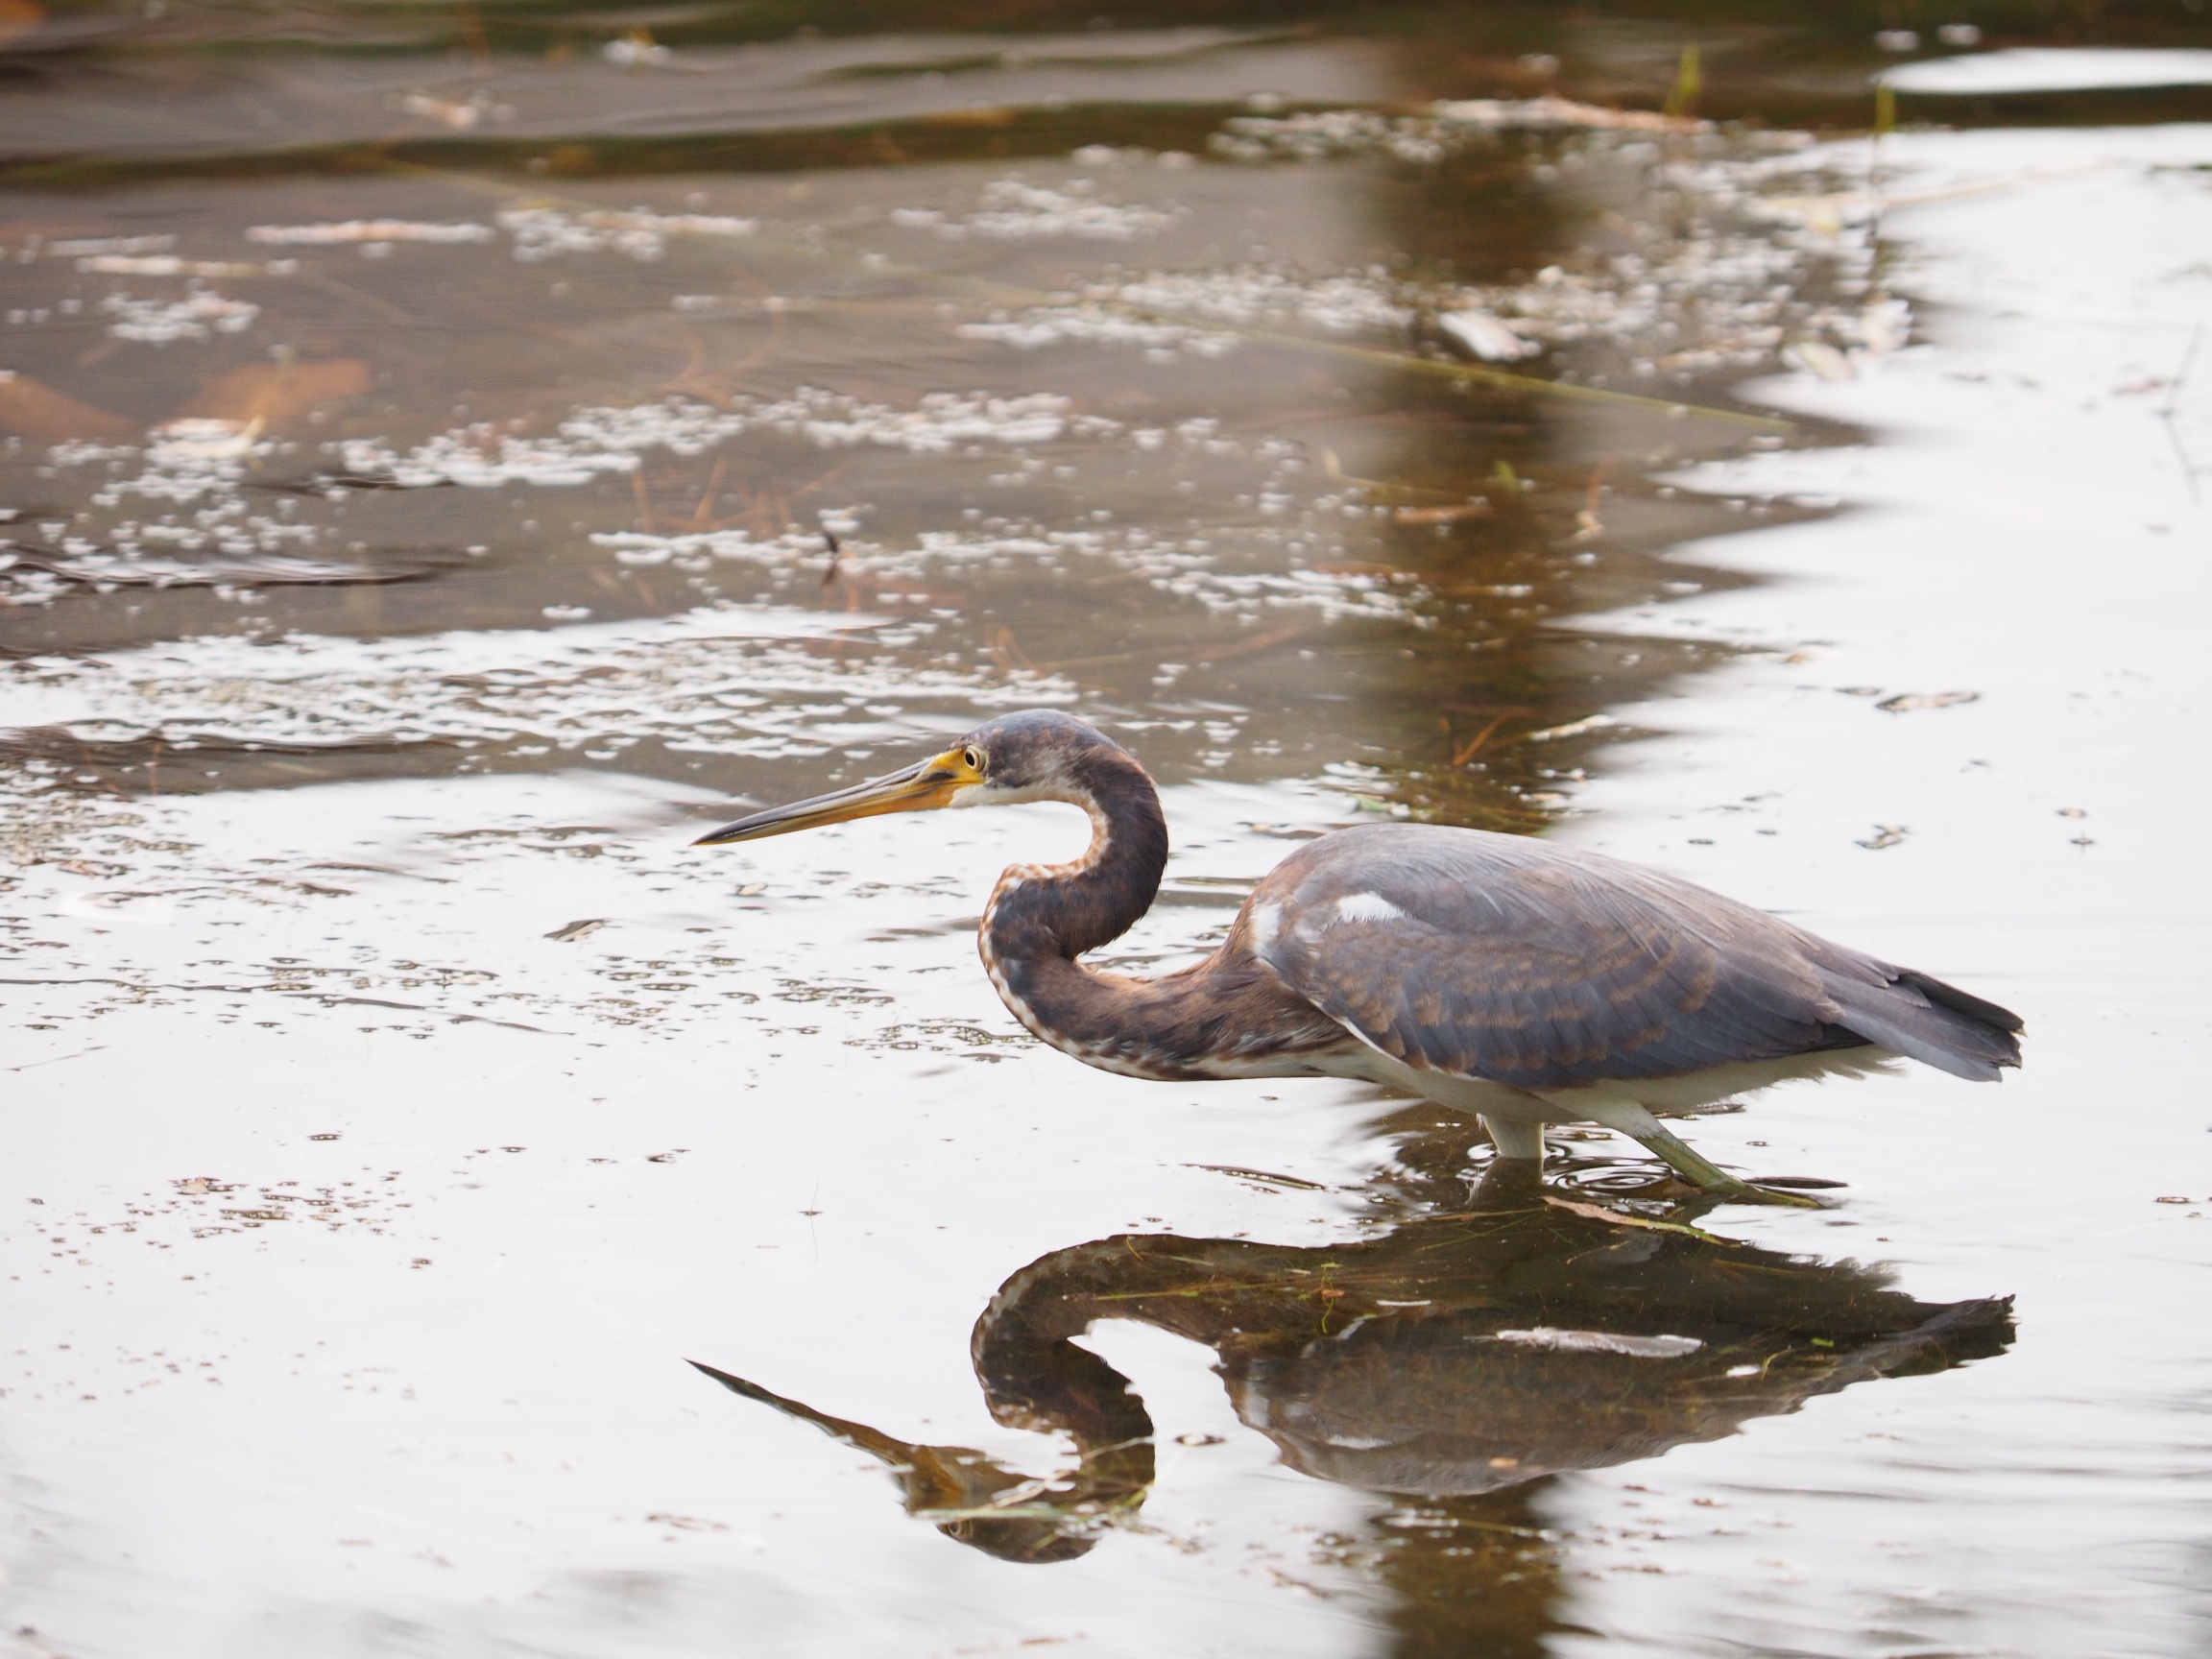 Photograph of a Tricolored Heron